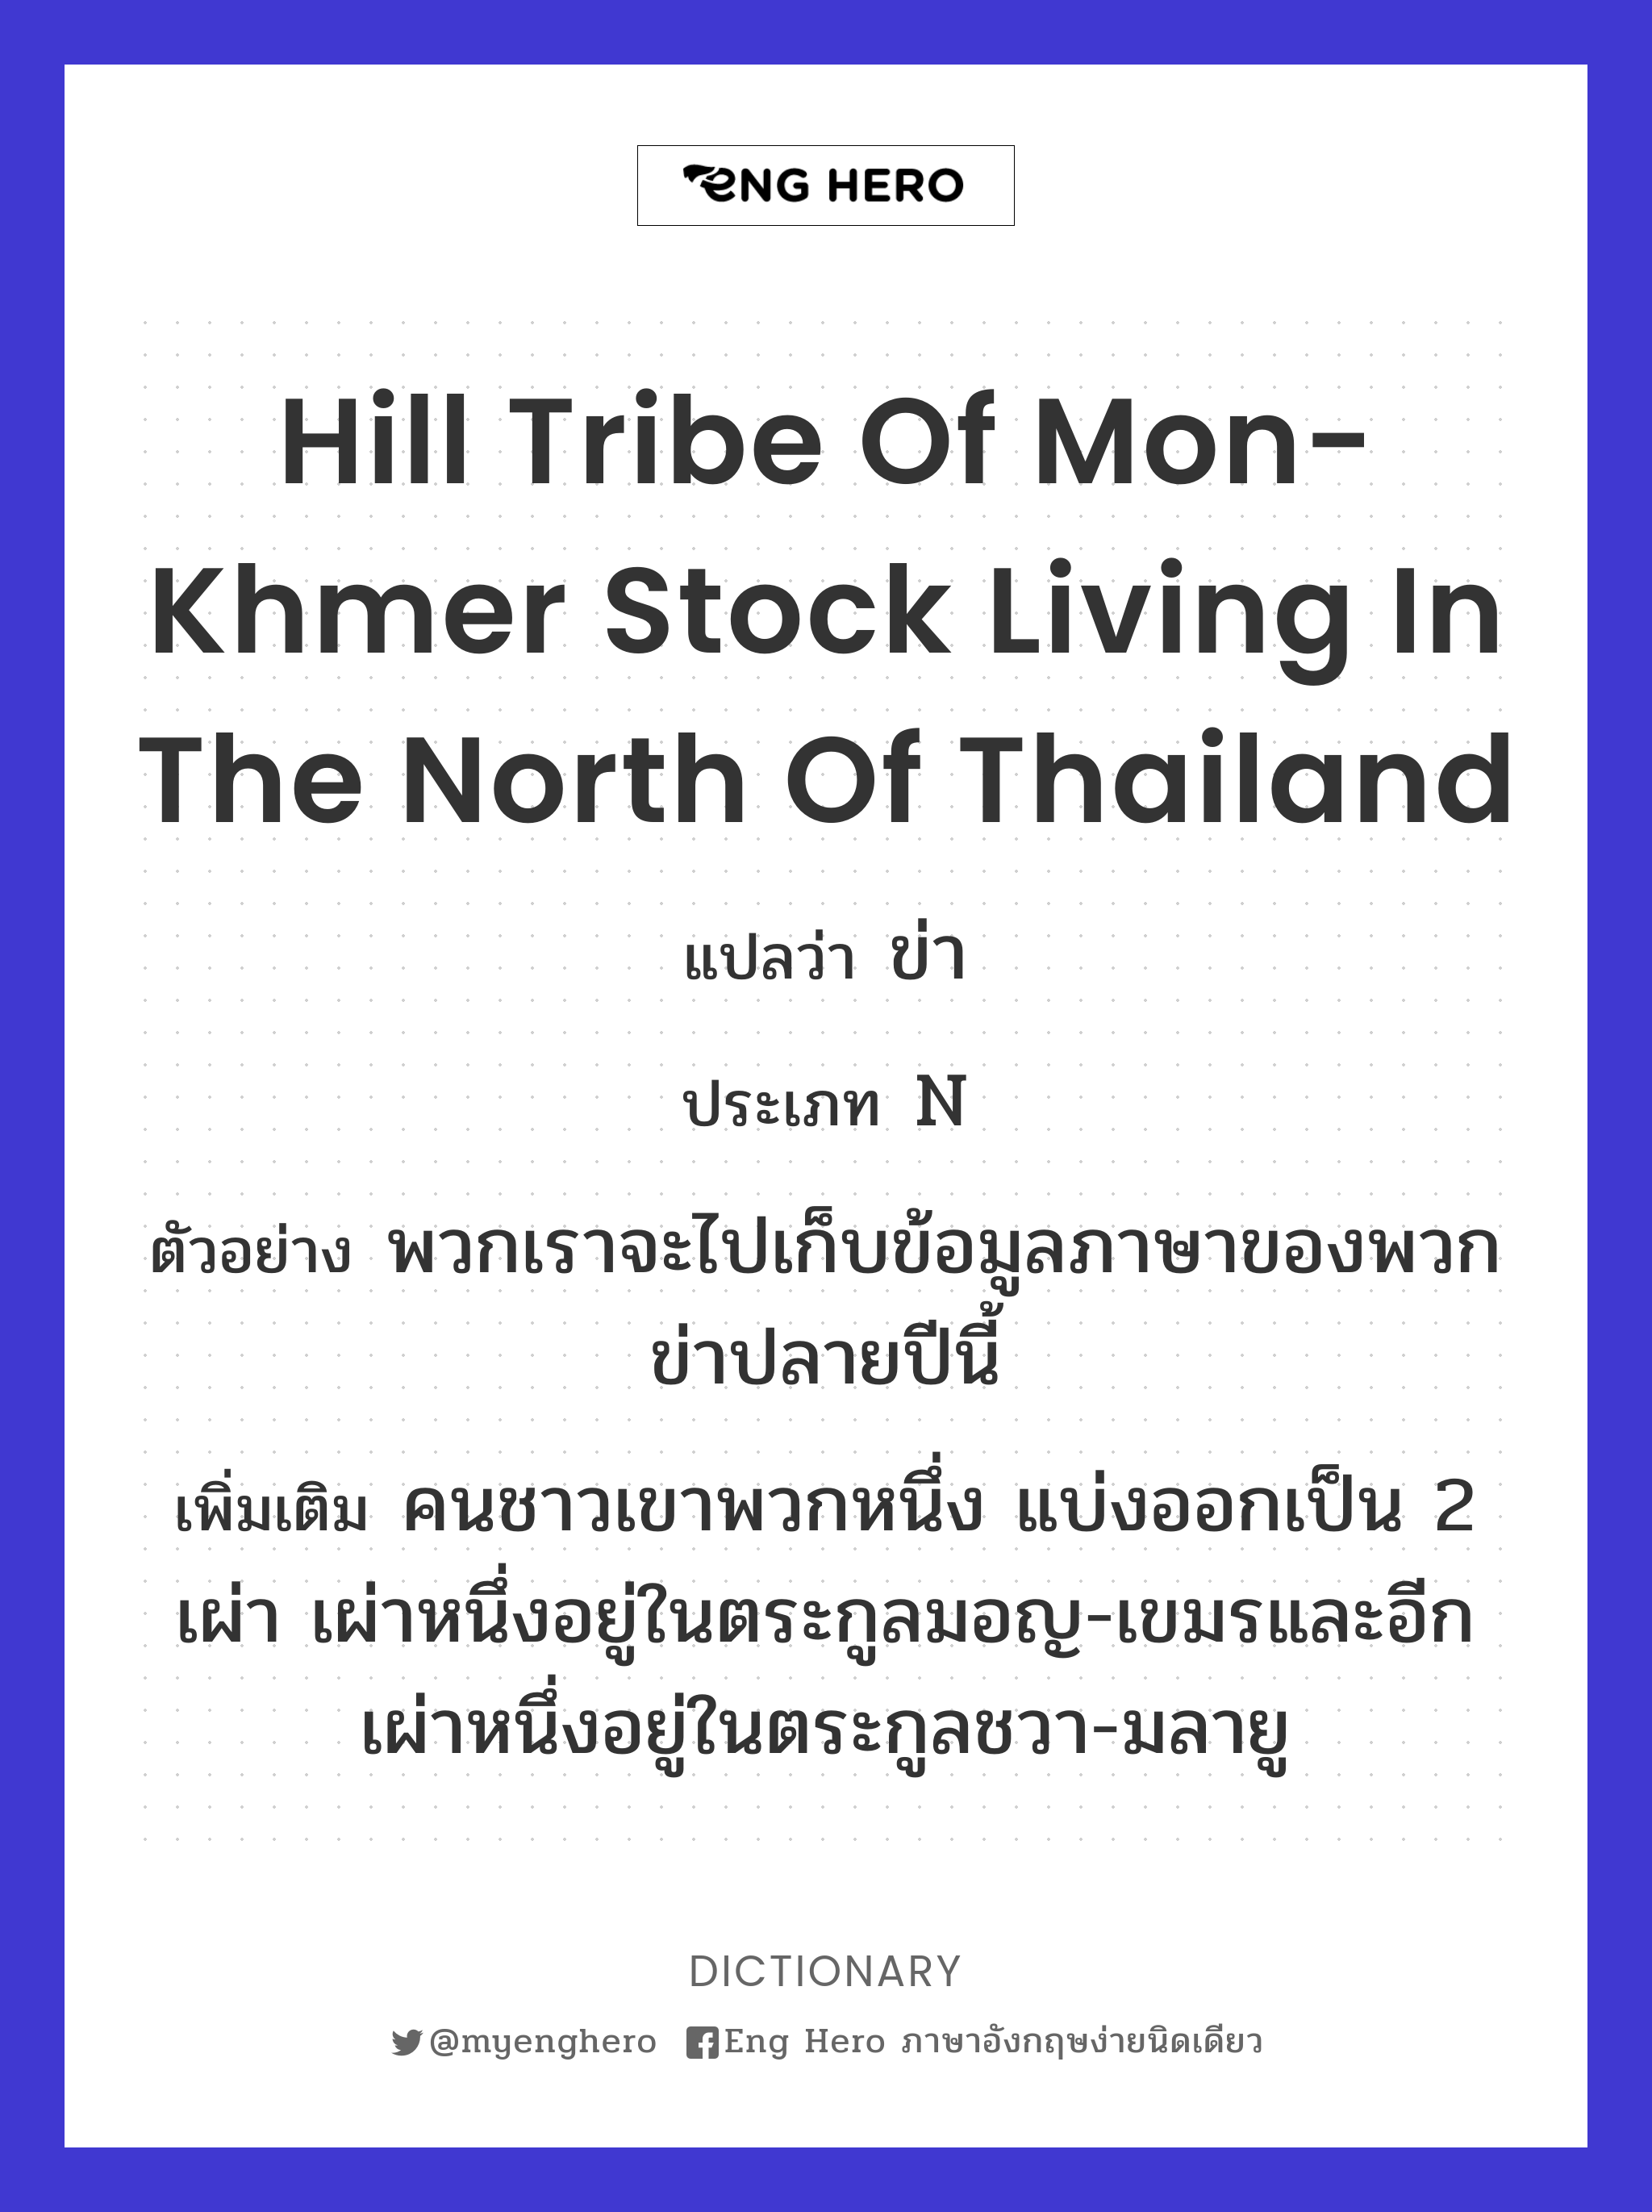 hill tribe of Mon-Khmer stock living in the north of Thailand